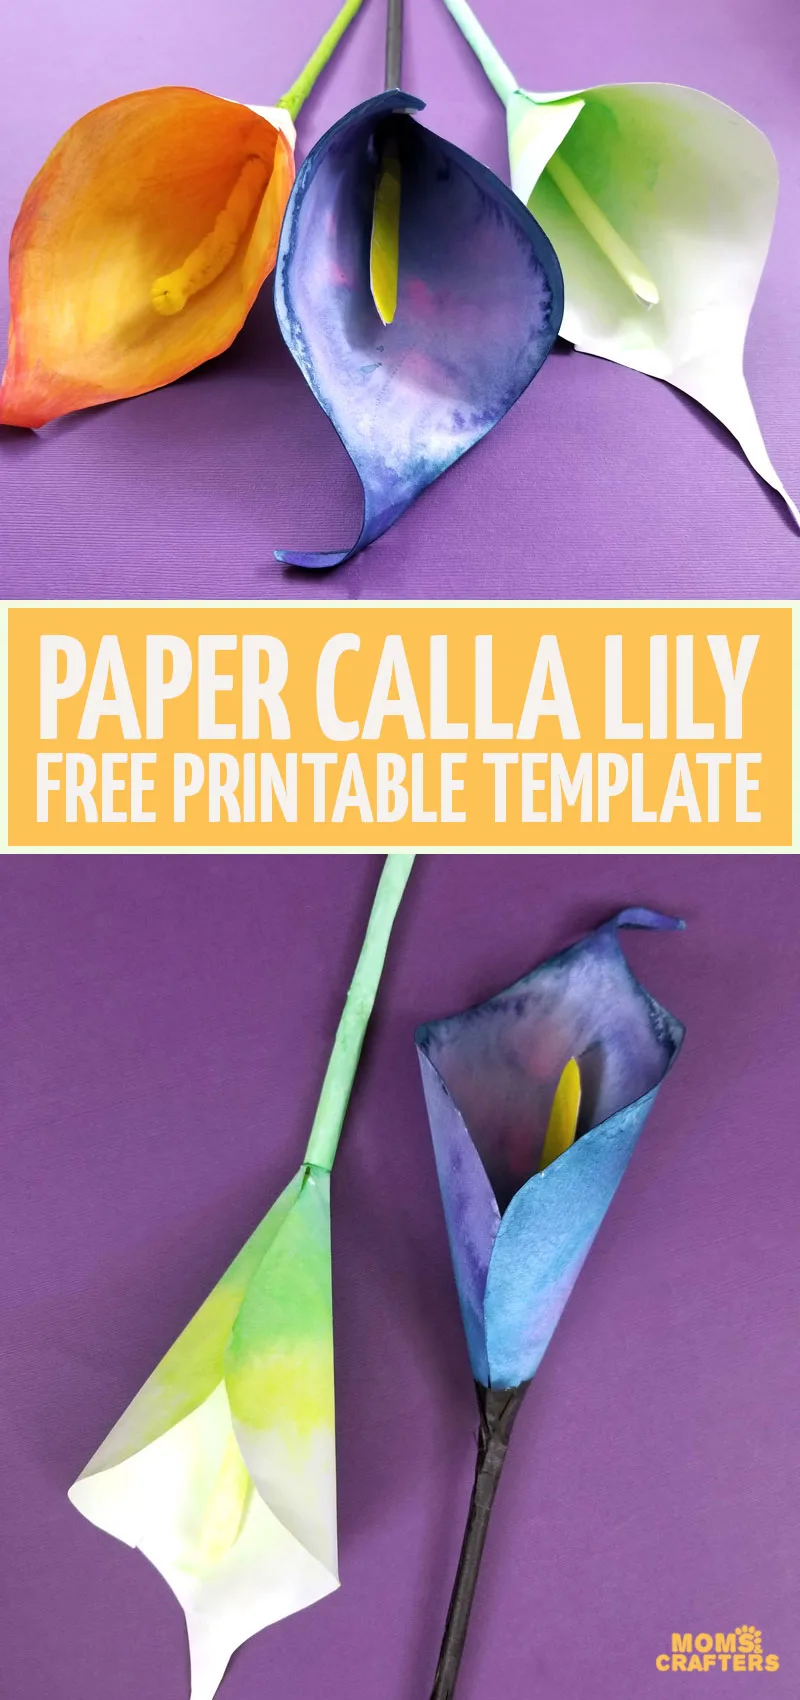 Want to learn a beautiful process for making watercolor paper flowers? Click to learn how to make a paper calla lily with free printable templates. These paper flowers are perfect for Mother's Day!